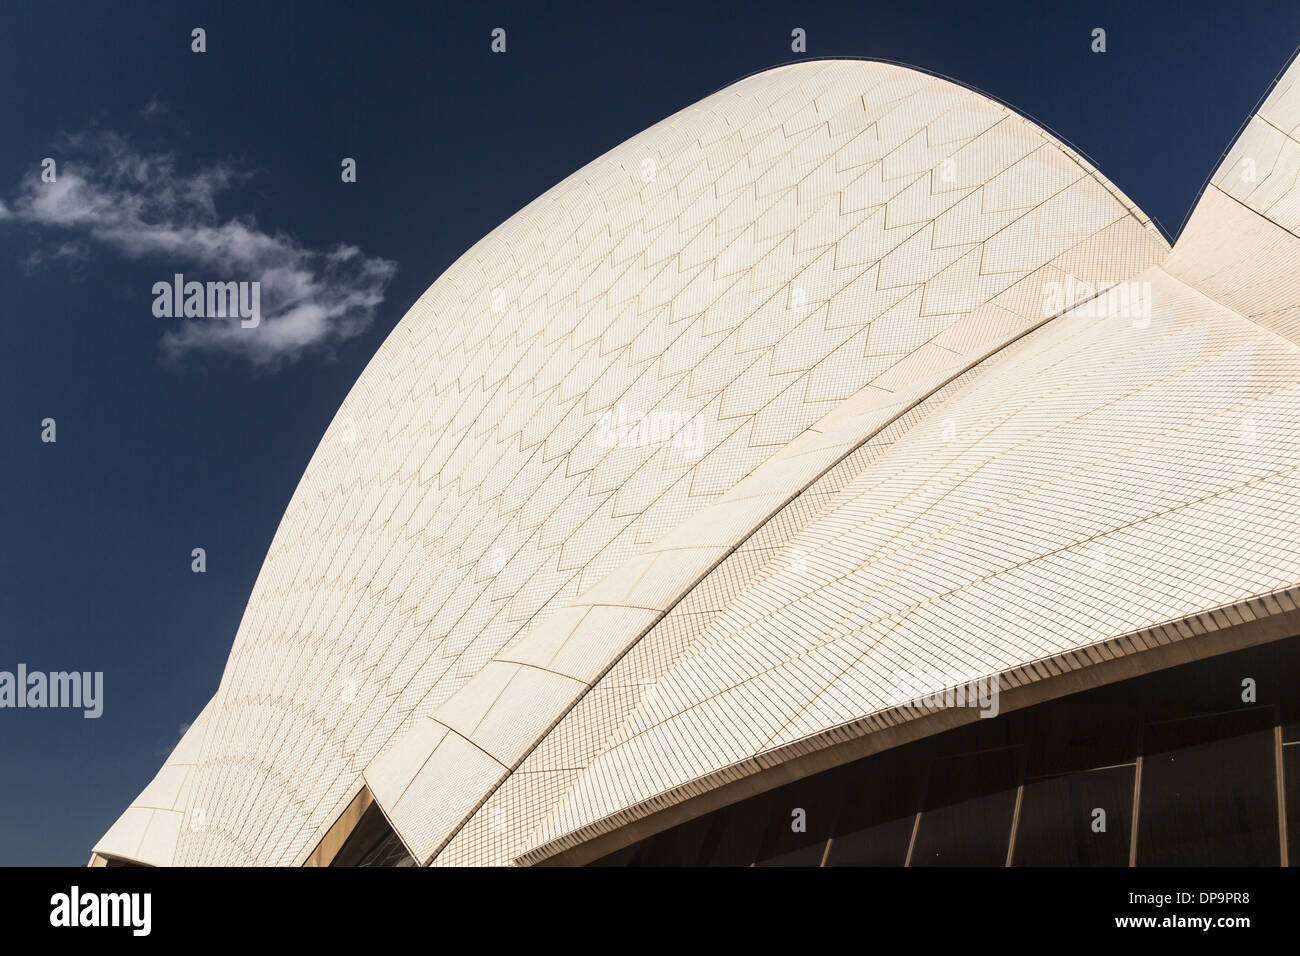 Architectural detail of the modern roof architecture of the Sydney Opera House, Australia Stock Photo